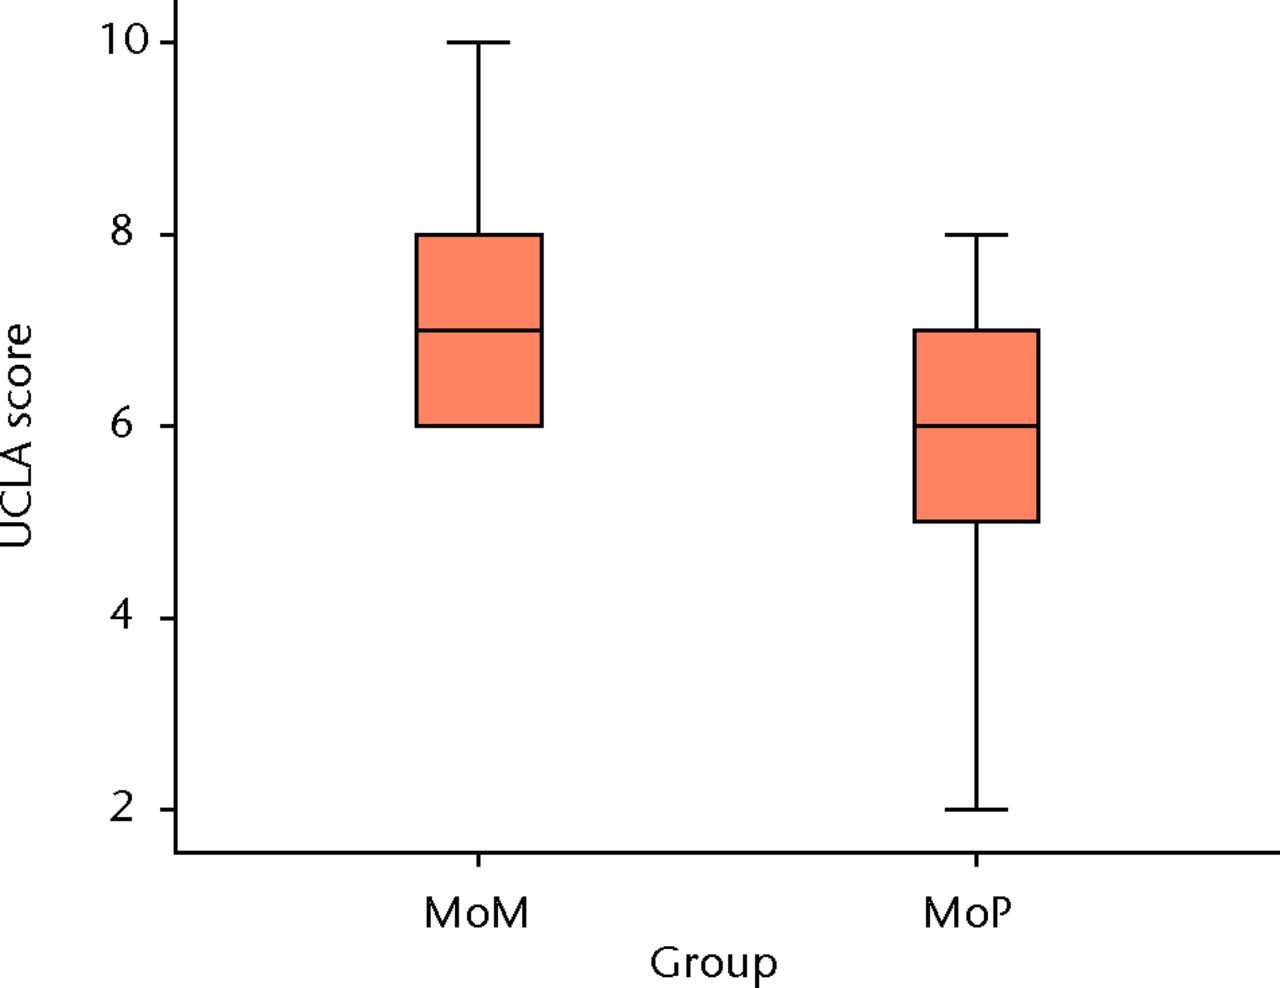 Figs. 3a - 3d 
          Graphs showing the outcome
at two years in the metal-on-metal (MoM) and metal-on-polyethylene
(MoP) groups. Figure 3a – boxplots showing the mean University of
California, Los Angeles (UCLA) activity score. The boxes represent
the mean and interquartile range (IQR) and the whiskers denote the
range of data. Figure 3b – histogram showing the mean Western Ontario and
McMaster Universities (WOMAC) osteoarthritis index by total score
and subscore. The error bars denote the standard deviation. Figure
3c – boxplots showing the mean Harris hip score. The boxes represent the
mean and IQR and the whiskers denote the range of data. Figure 3d
– histogram showing the mean RAND-36 score by different parameter. The
error bars denote the standard deviation.
        